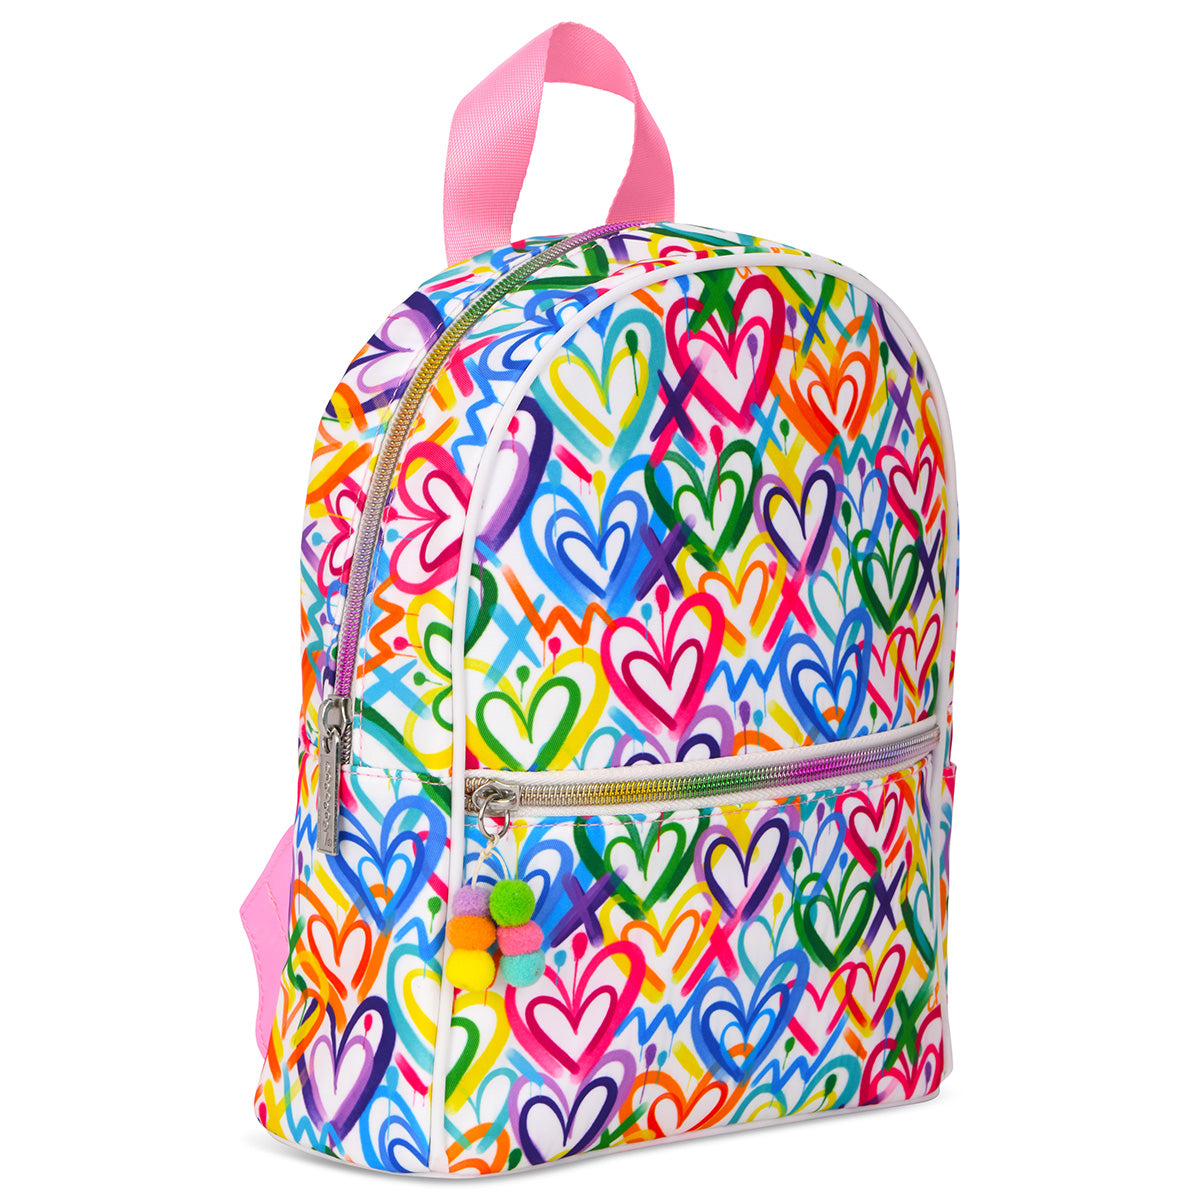 Corey Paige Hearts Mini Backpack Cover